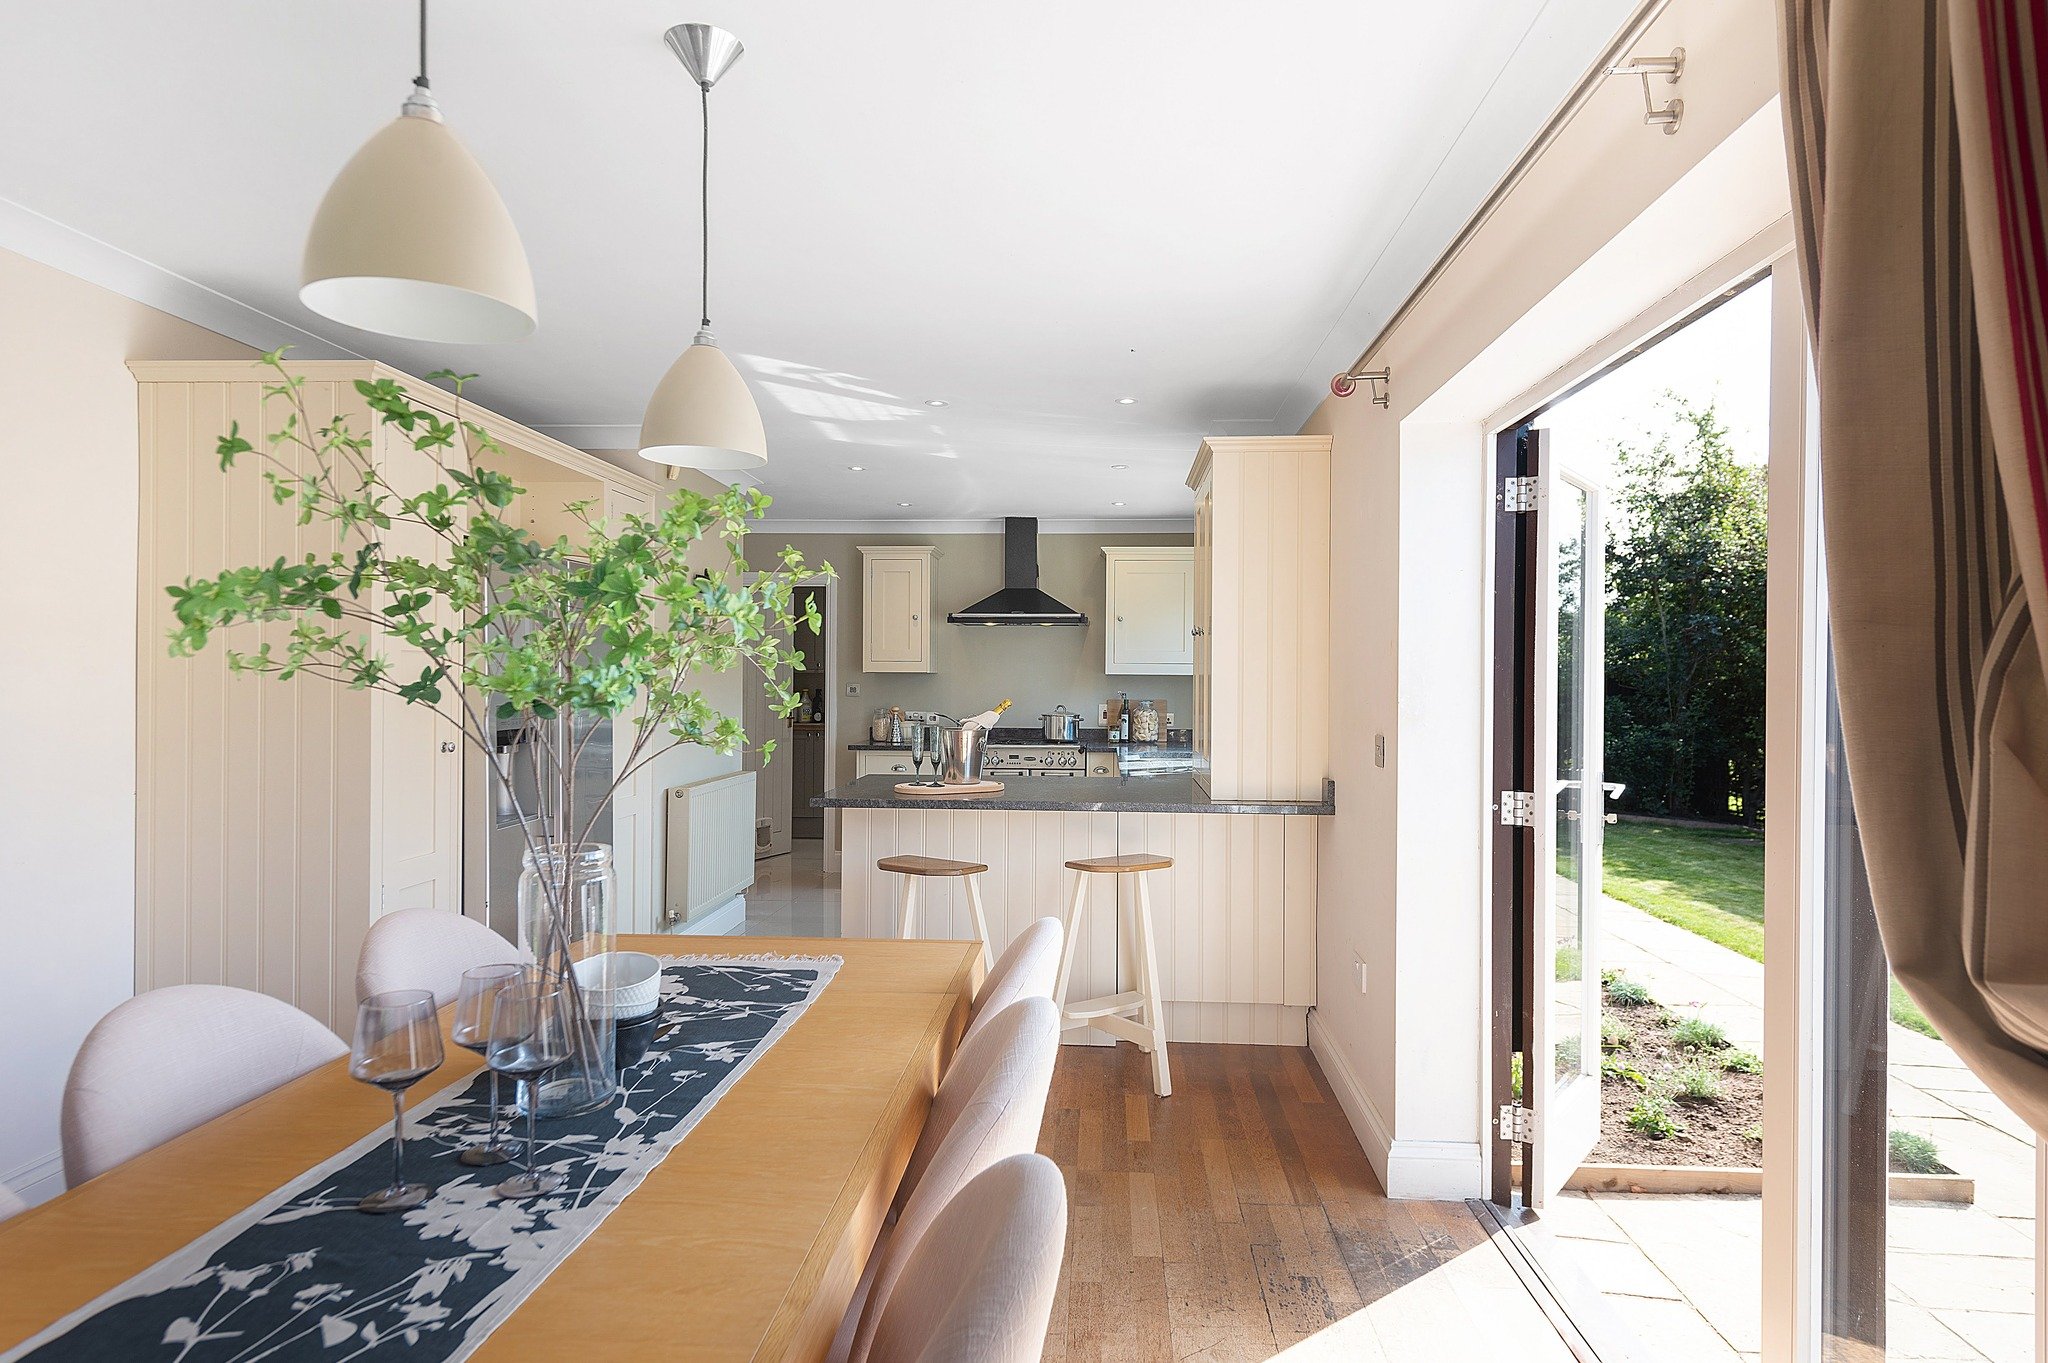 It's important when staging a space, not just how the interior looks but how this connects to any outdoor spaces. This wonderful kitchen diner that opens out to the garden really emphasises that indoor/outdoor living, which we highlighted through sta